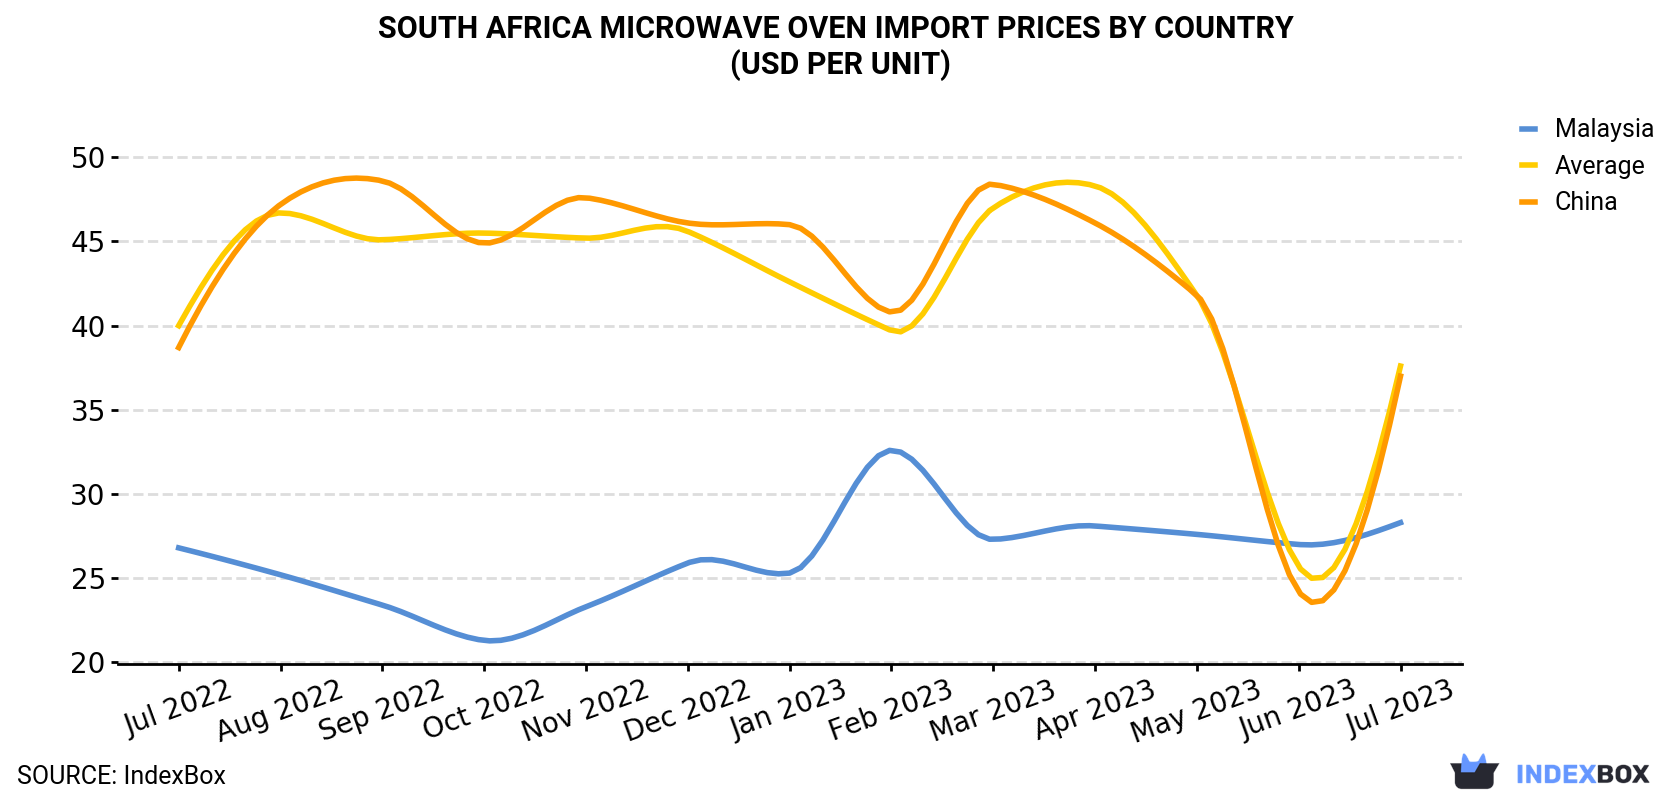 South Africa Microwave Oven Import Prices By Country (USD Per Unit)